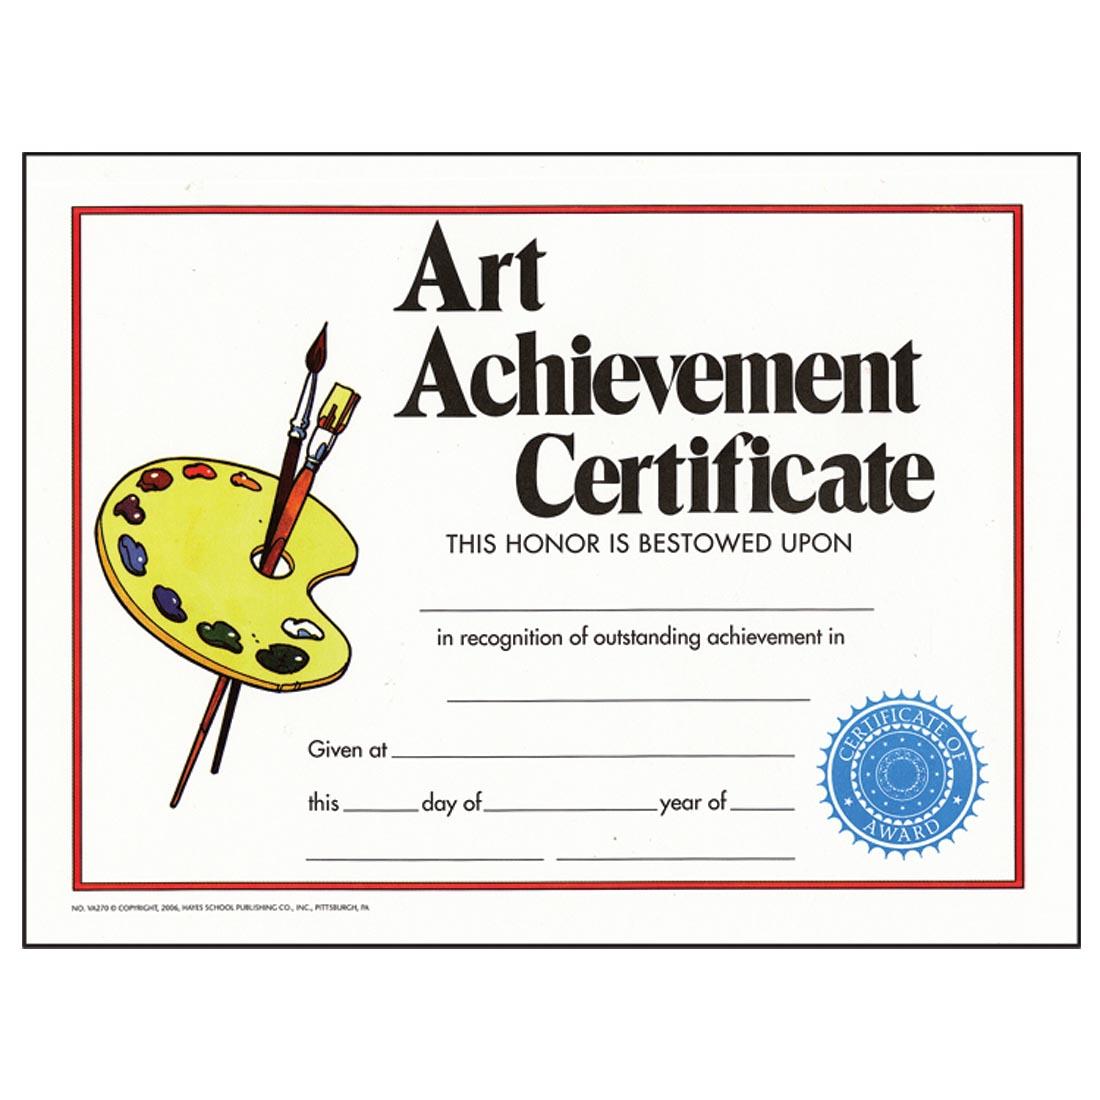 Art Achievement Certificate with a picture of a Palette and Paint Brushes